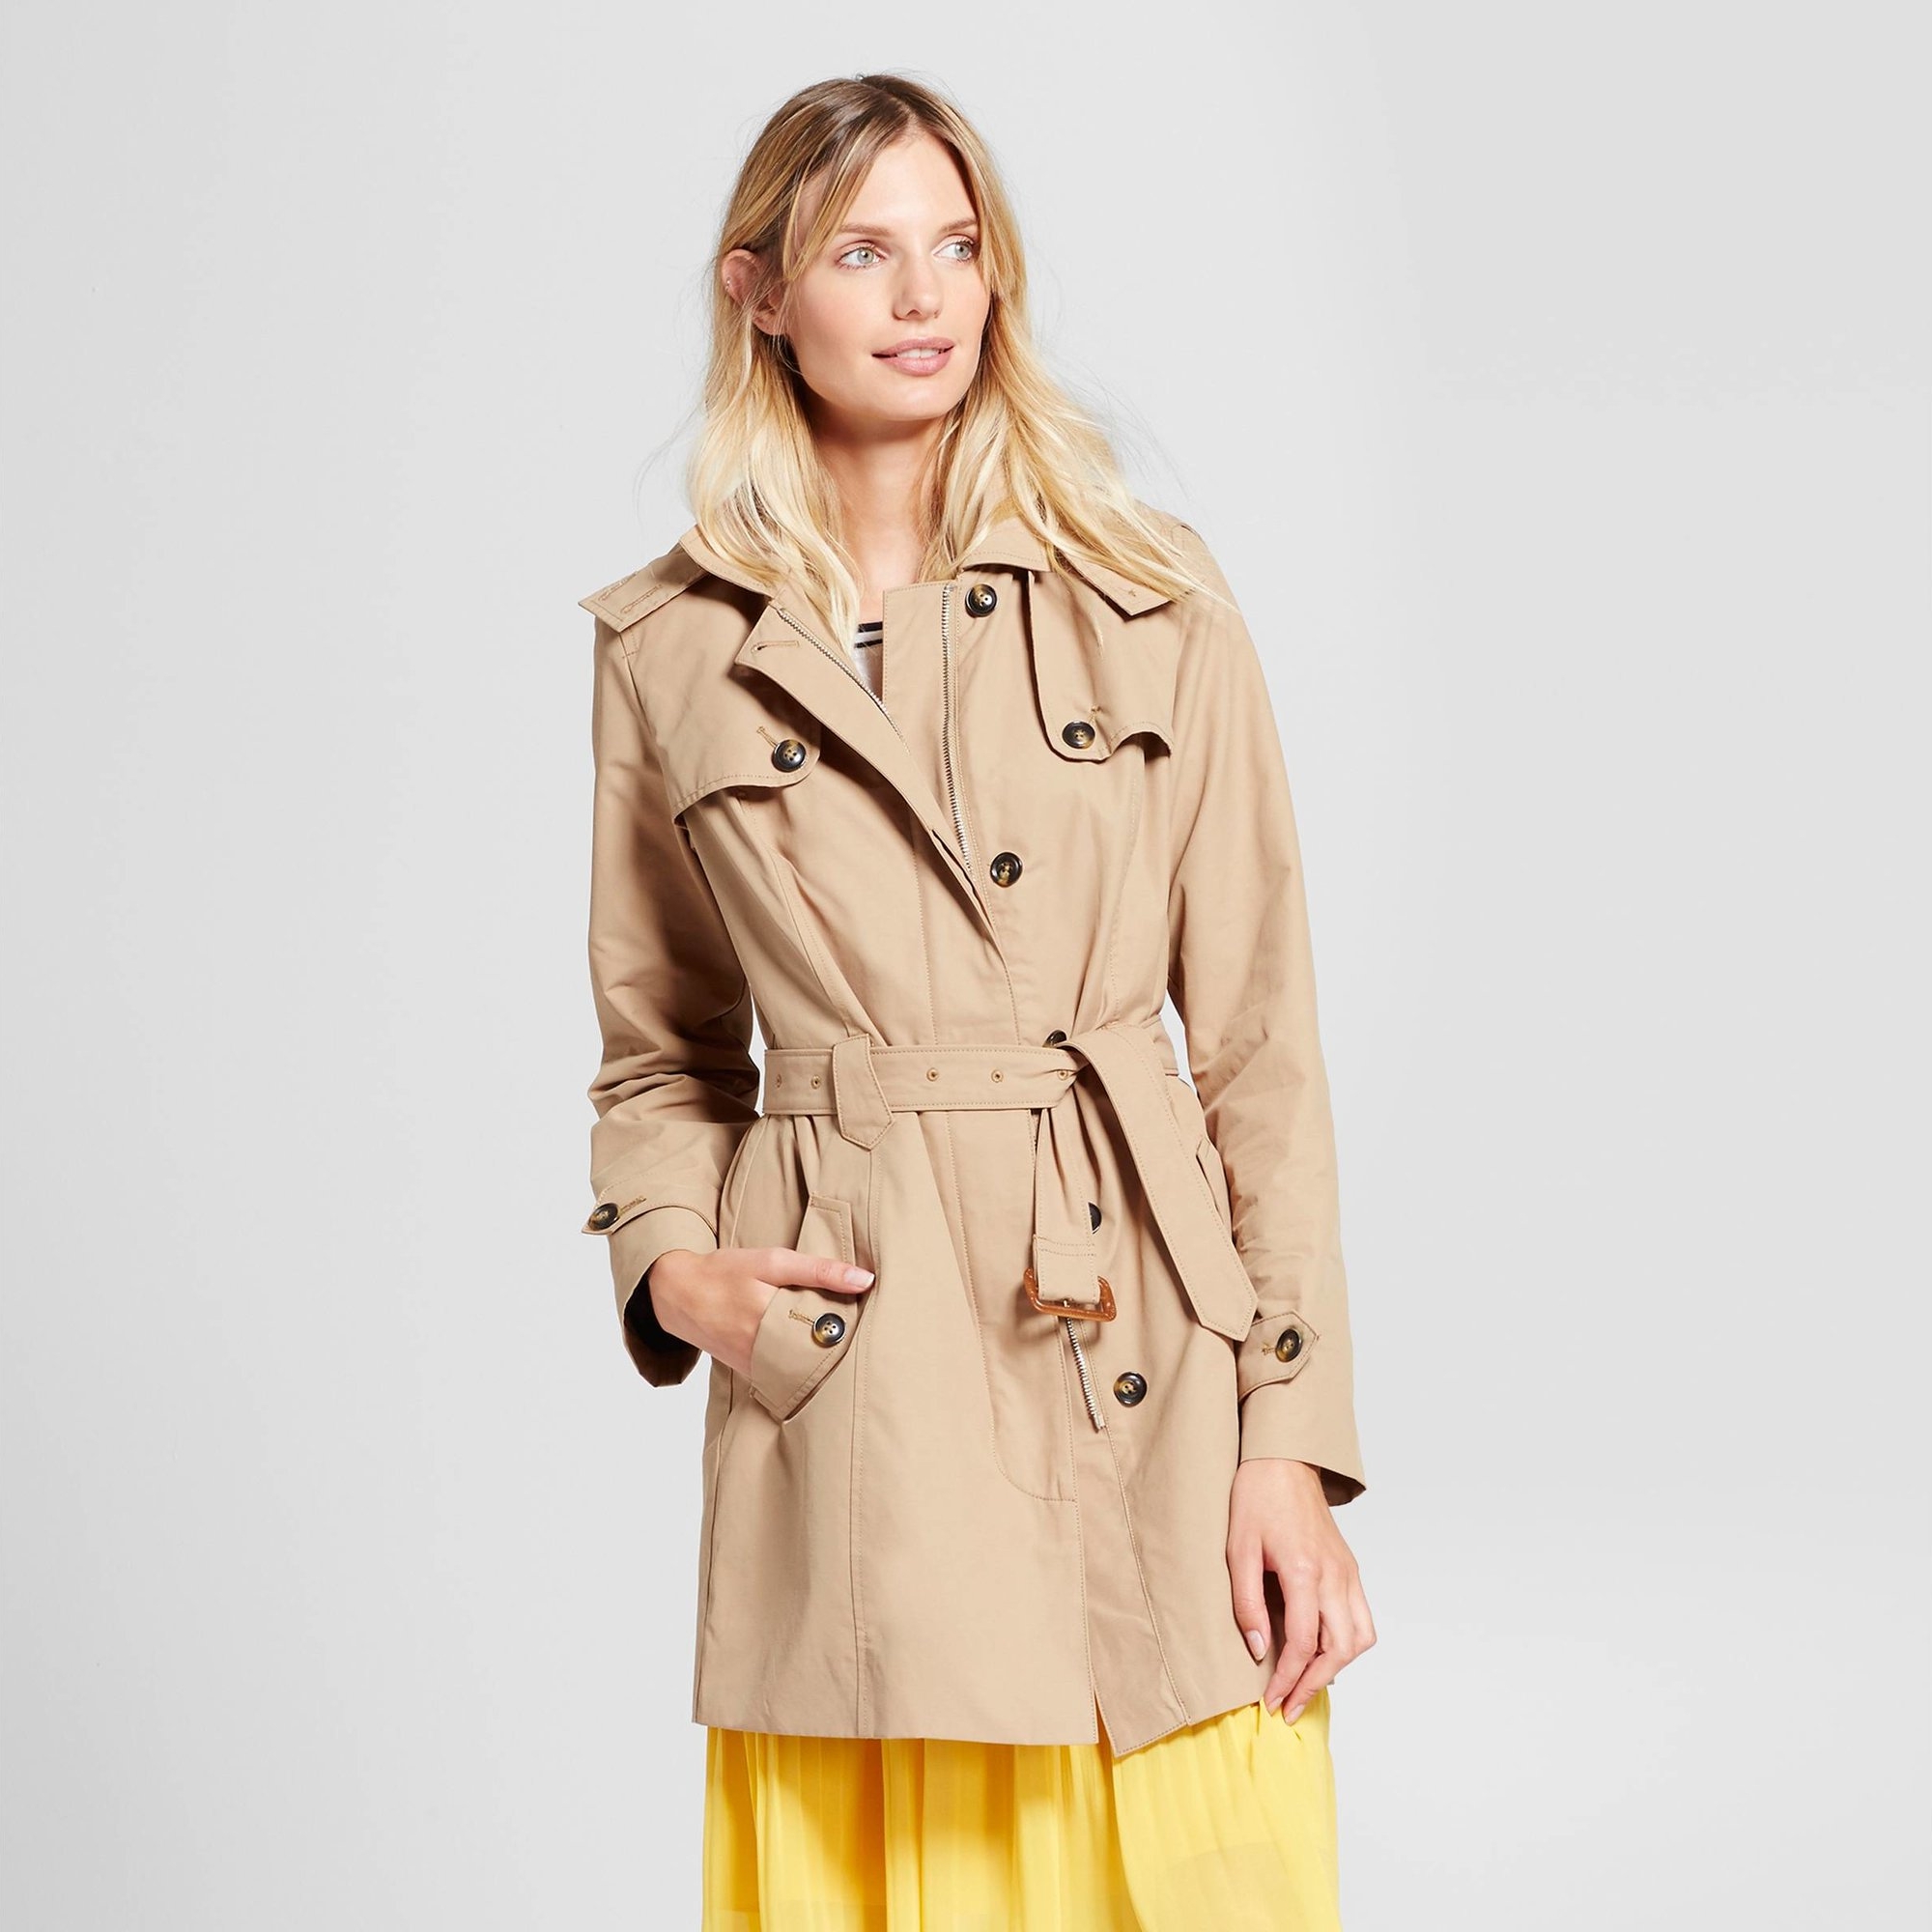 A New Day Hooded Trench Coat by Target